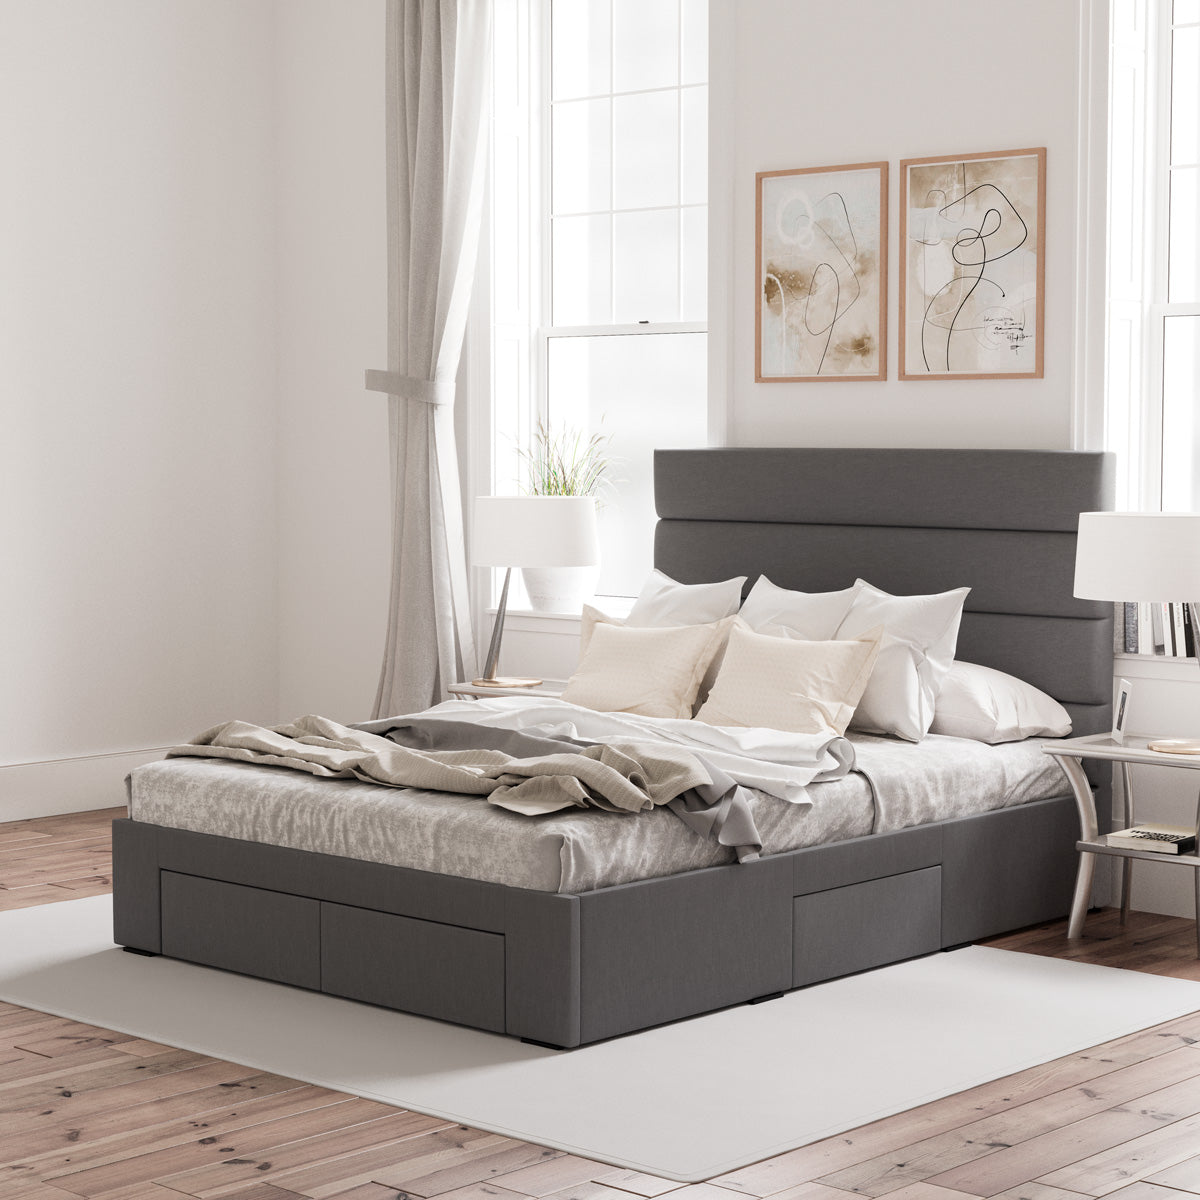 Benny Bed Frame with Four Storage Drawers (Charcoal Fabric)